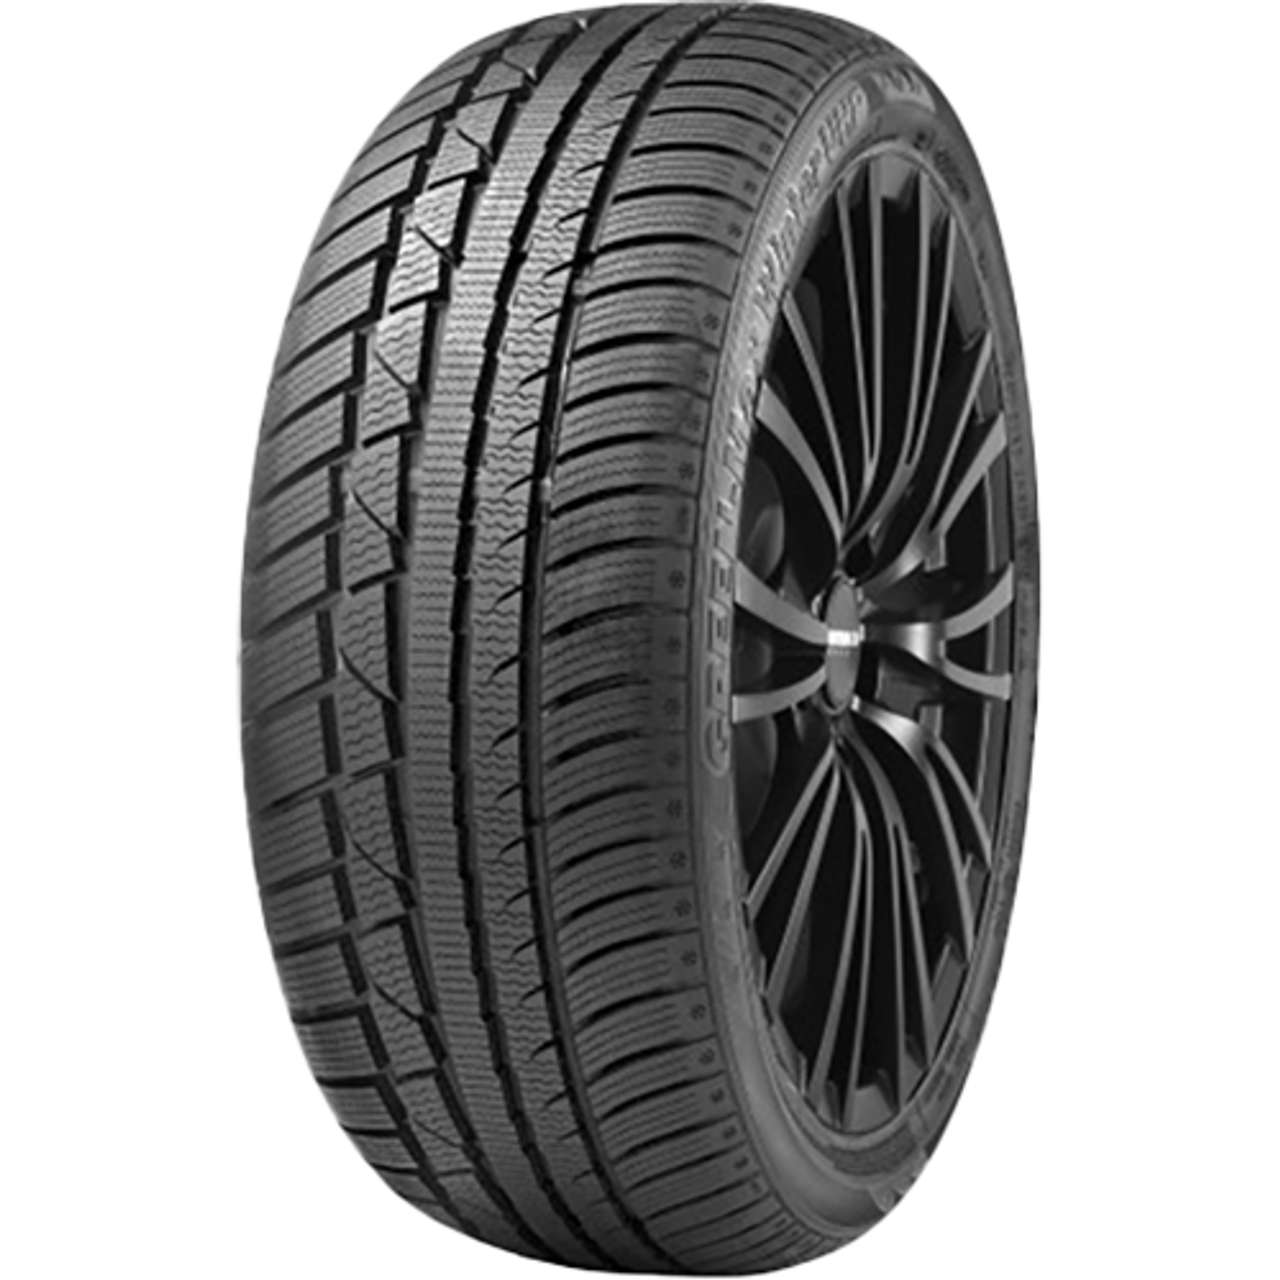 LINGLONG GREEN-MAX WINTER UHP 245/40R18 97V MFS BSW